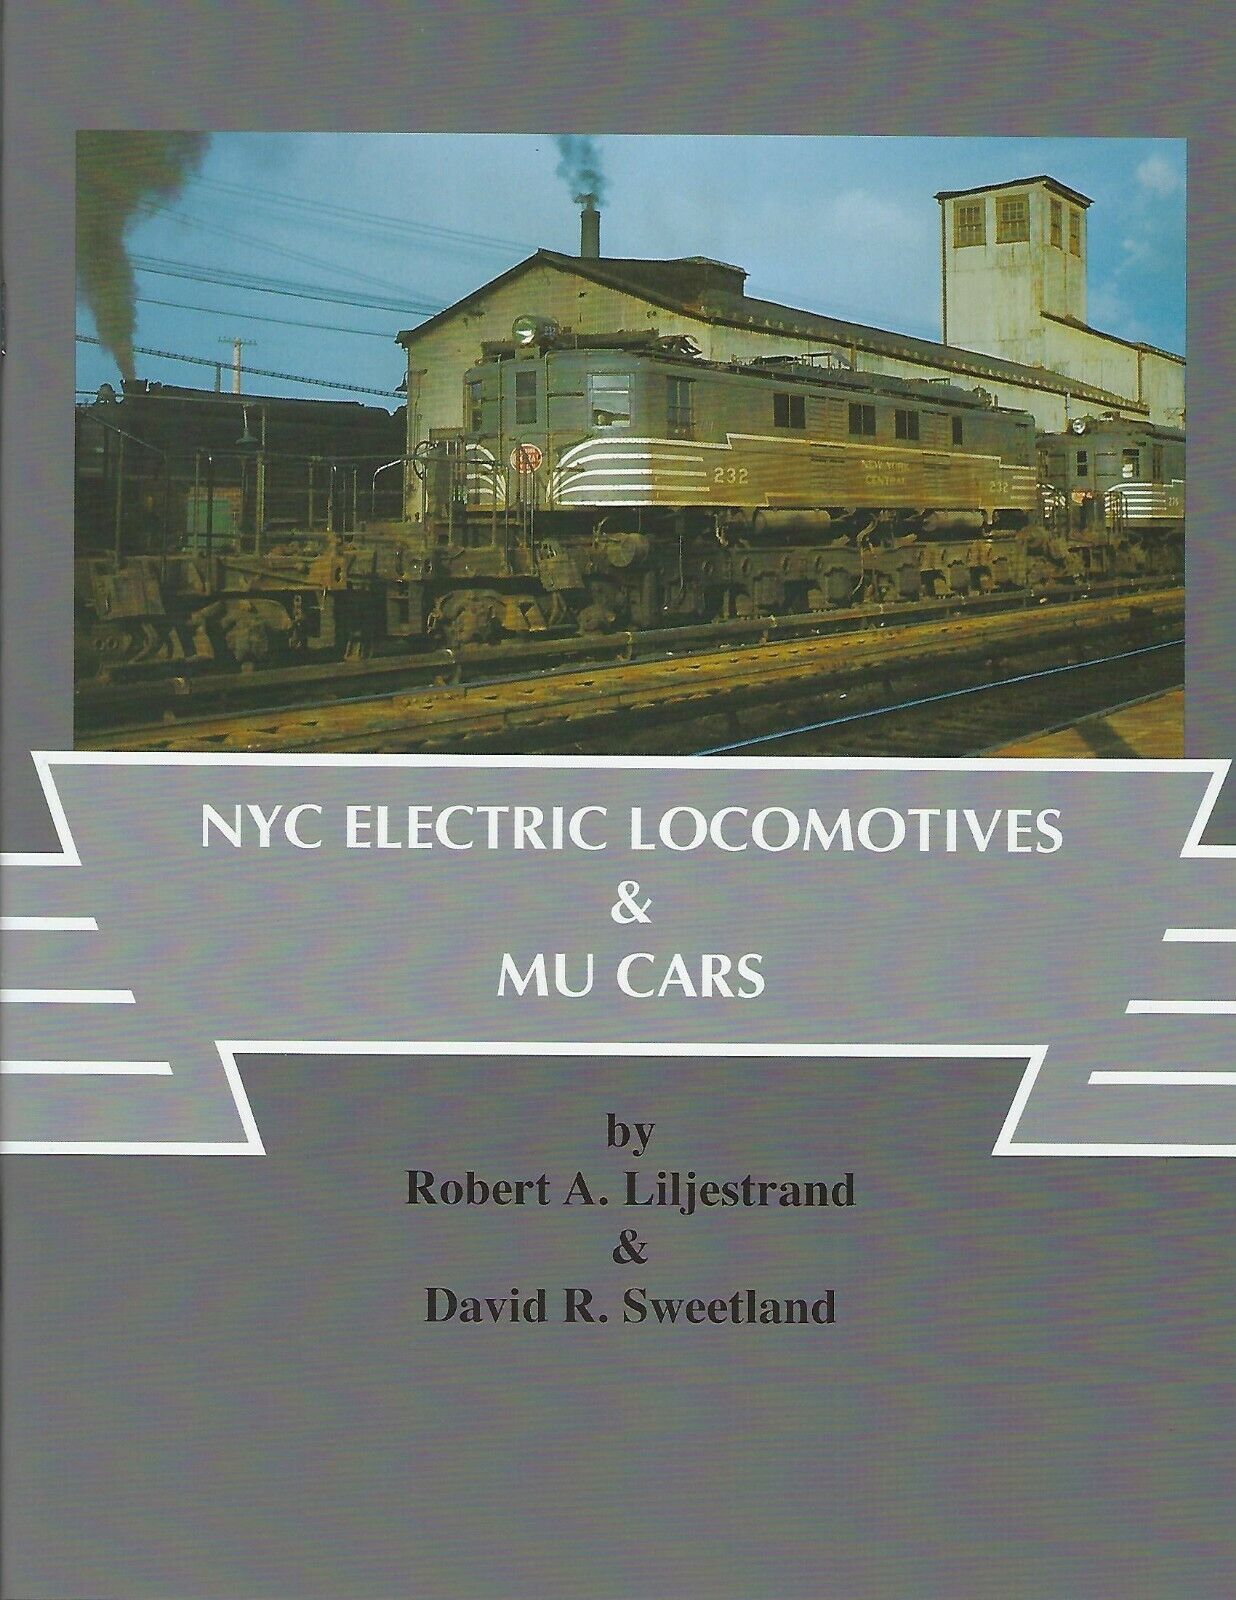 NYC Electric Locomotives & MU Cars (multiple-unit commuter cars) - NEW BOOK